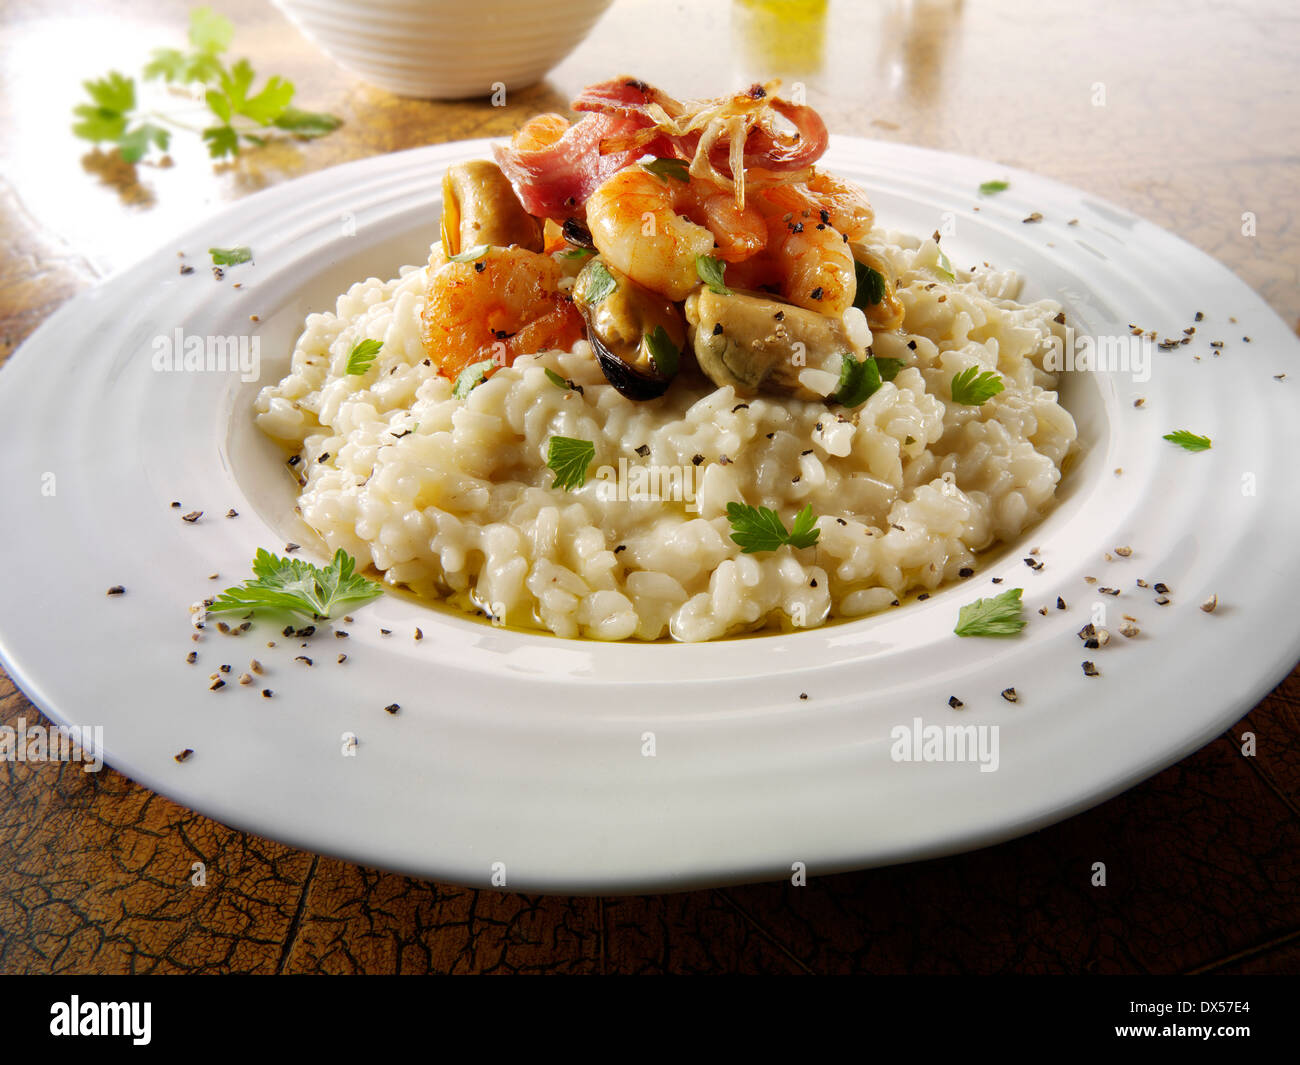 Fresh cooked prawns and mussels risotto, served plated on a table setting. Serving suggestion Stock Photo